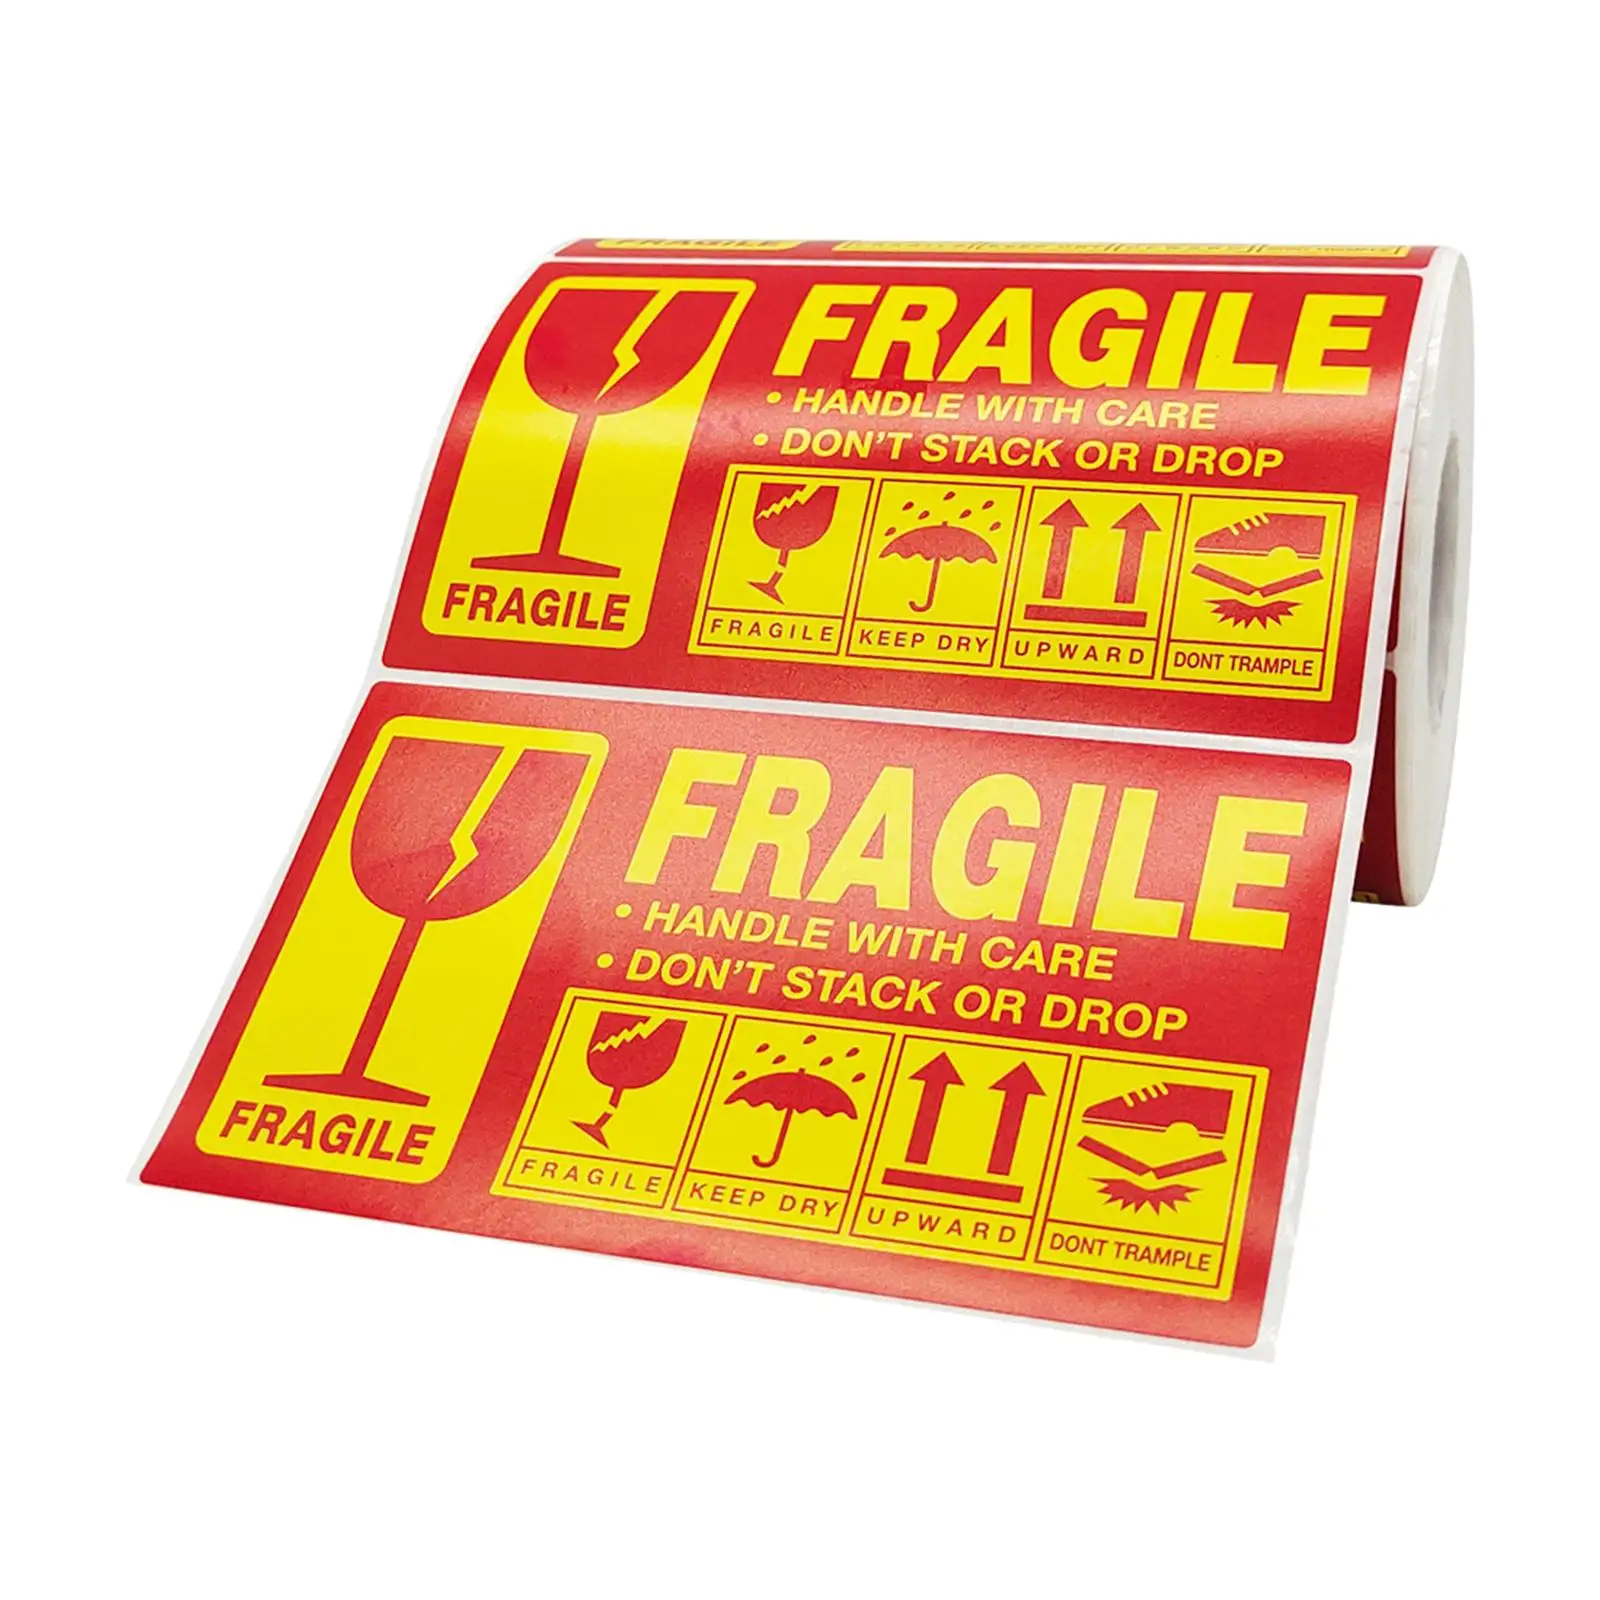 Fragile Handle with Care Packing Tape Sealing Tape for Shipping Box Transportation Mailing Office Carton Box Supplies